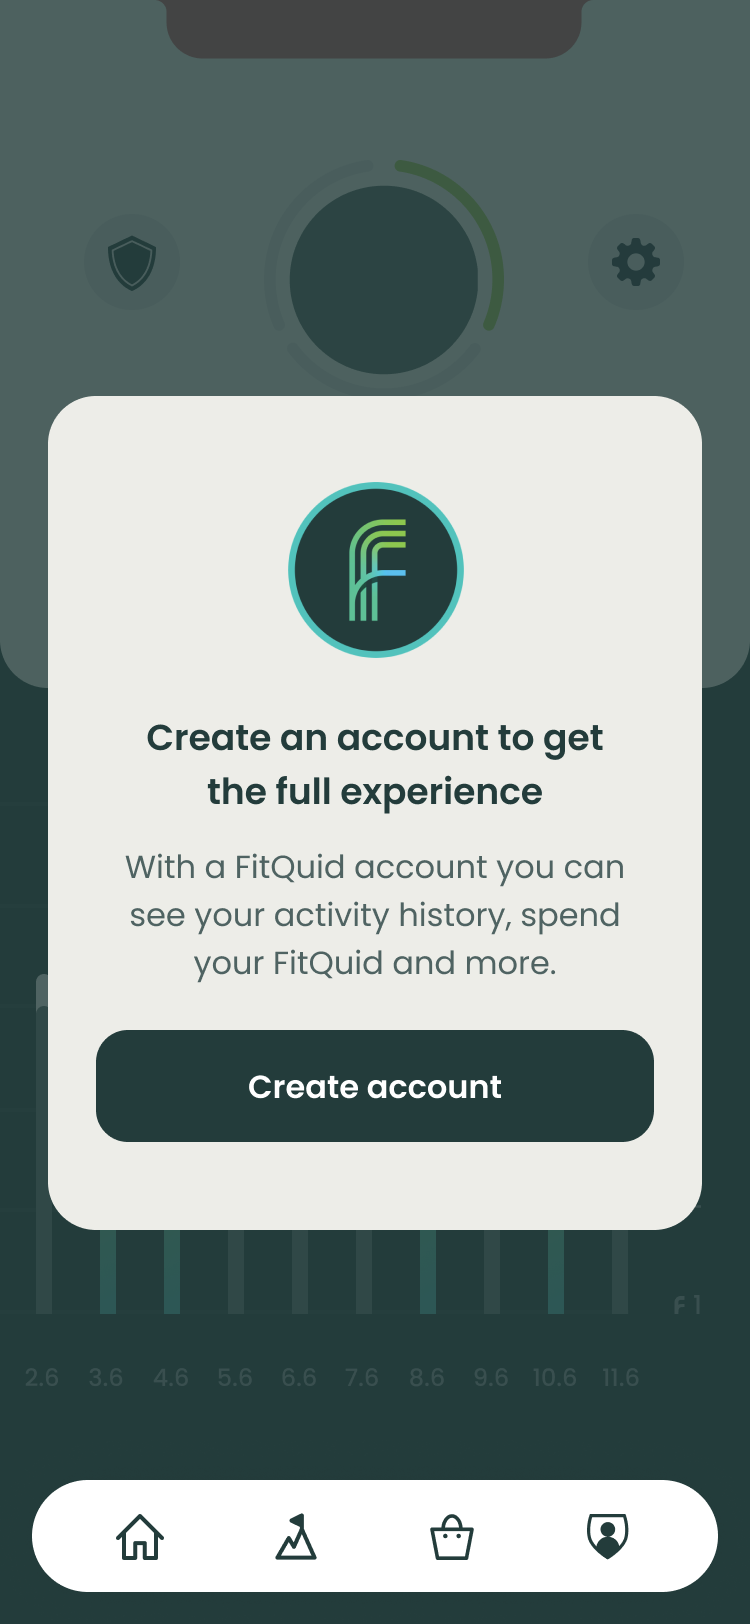 A photo of the FitQuid account homescreen